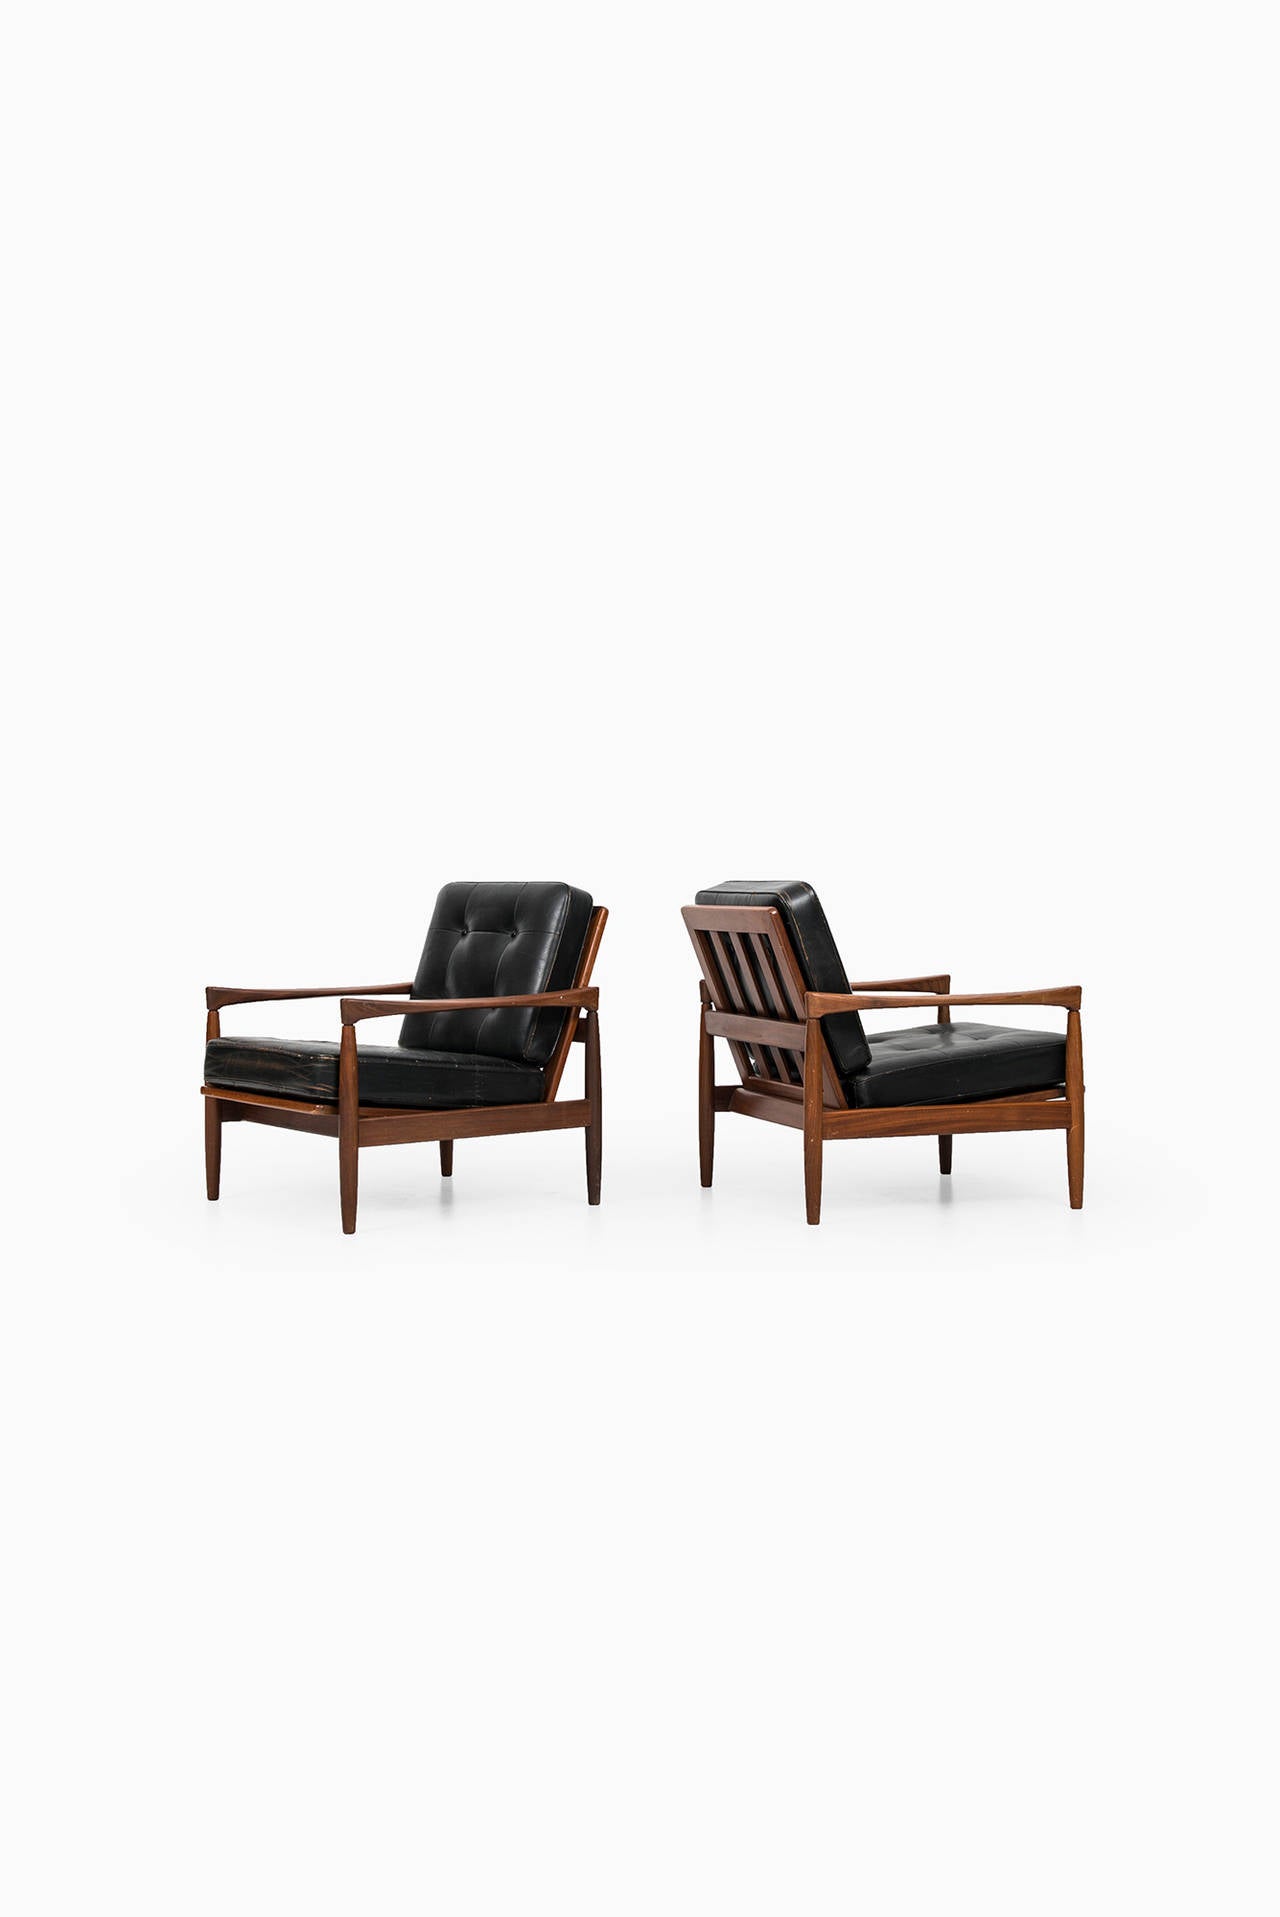 A pair of easy chairs model Kolding in teak and black leather designed by Erik Wørts. Produced by Bröderna Andersson in Sweden.